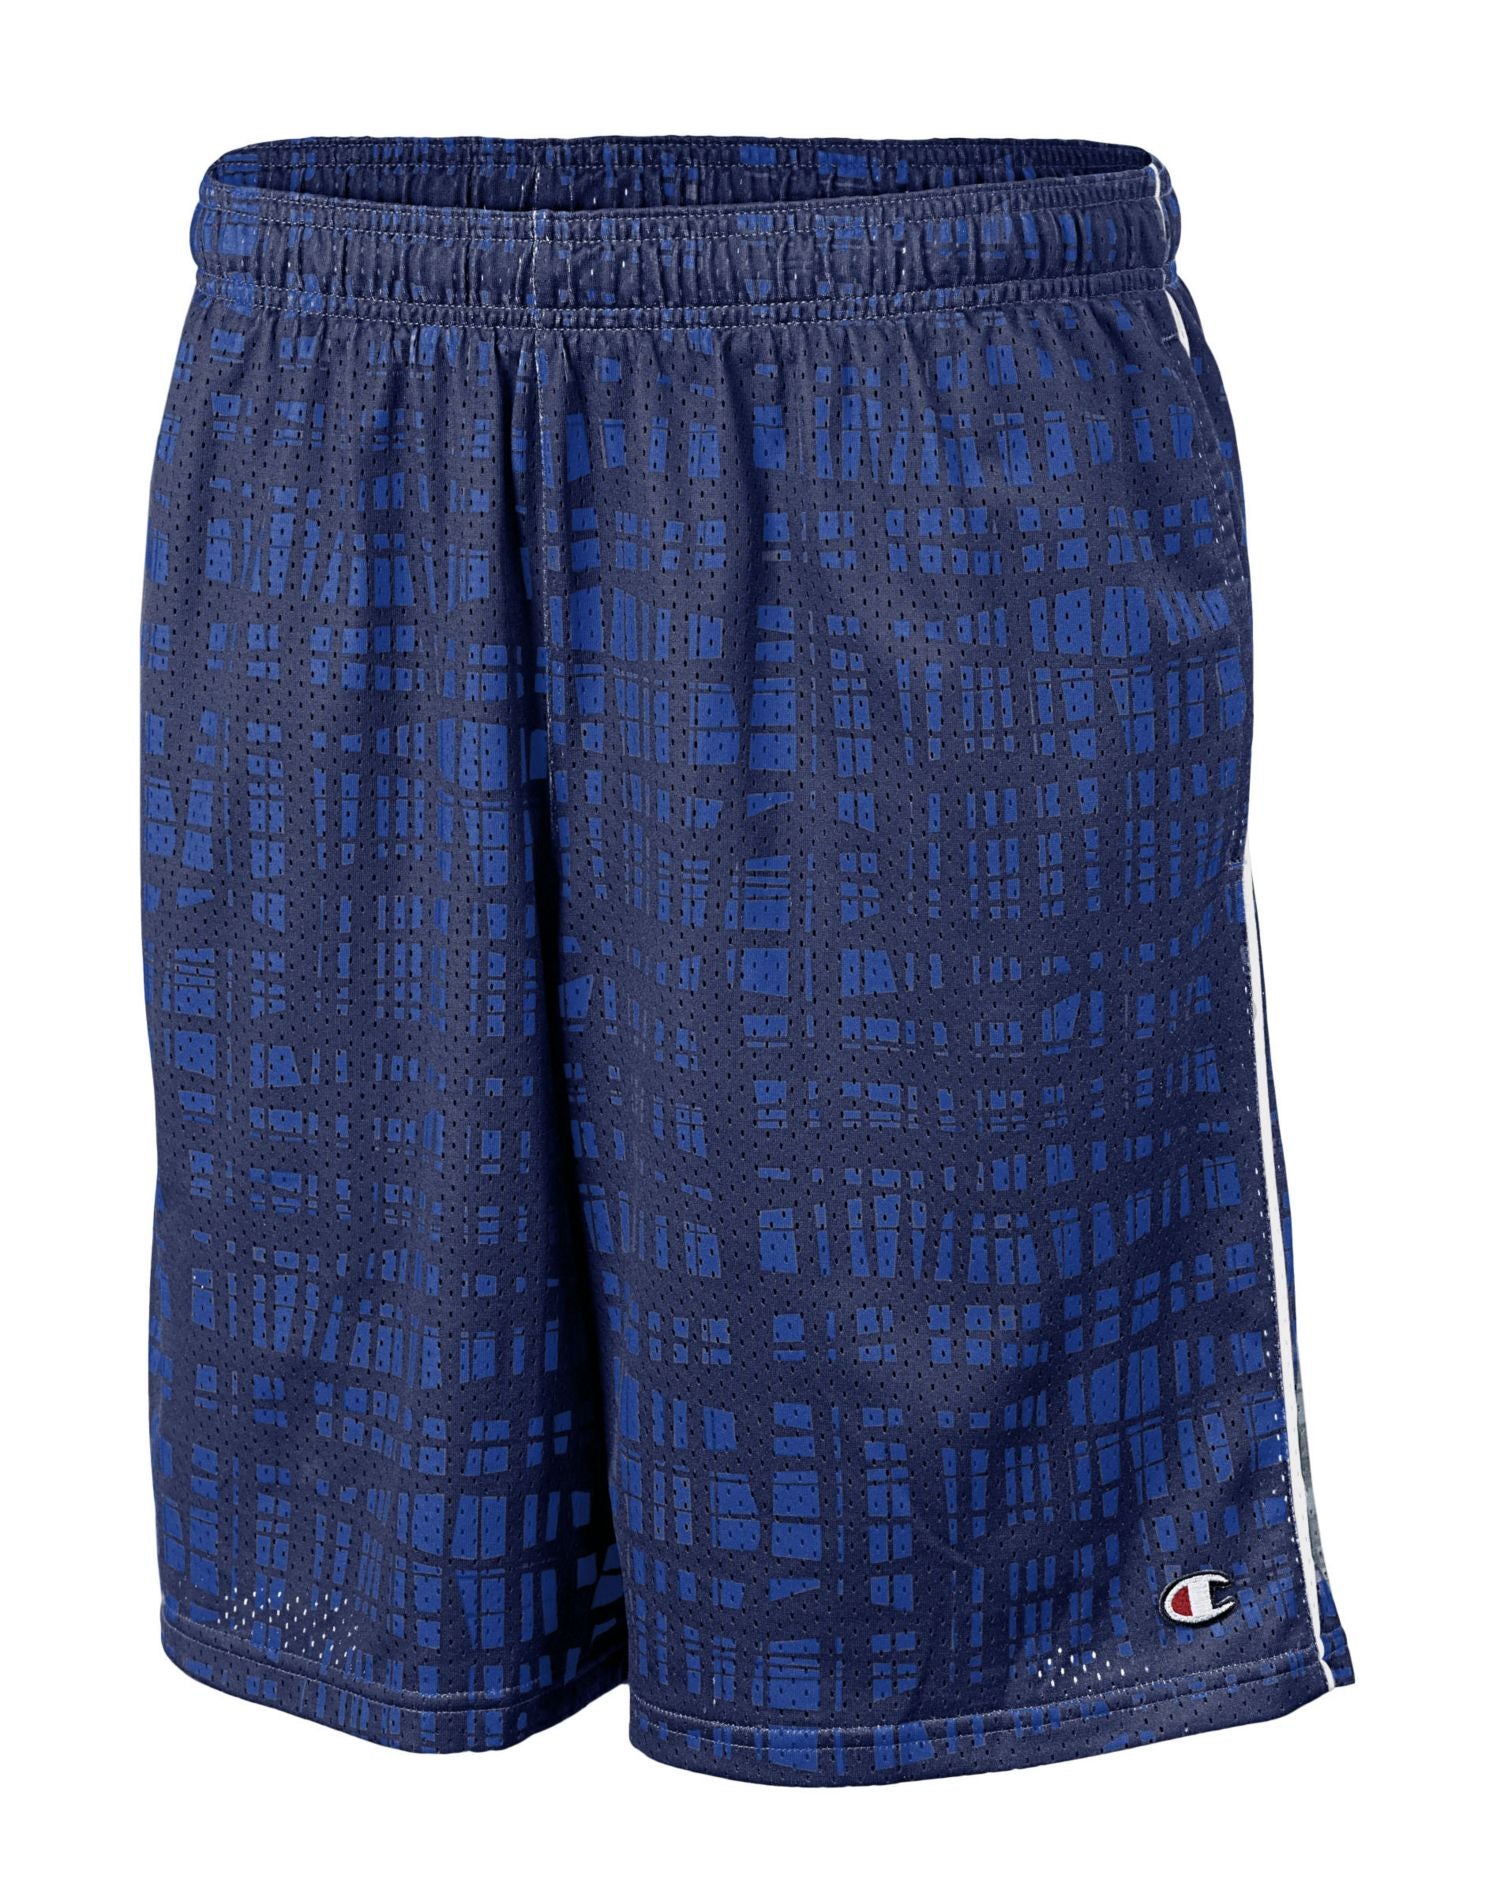 84955 - Champion Authentic Printed Men's Mesh Shorts With Pockets